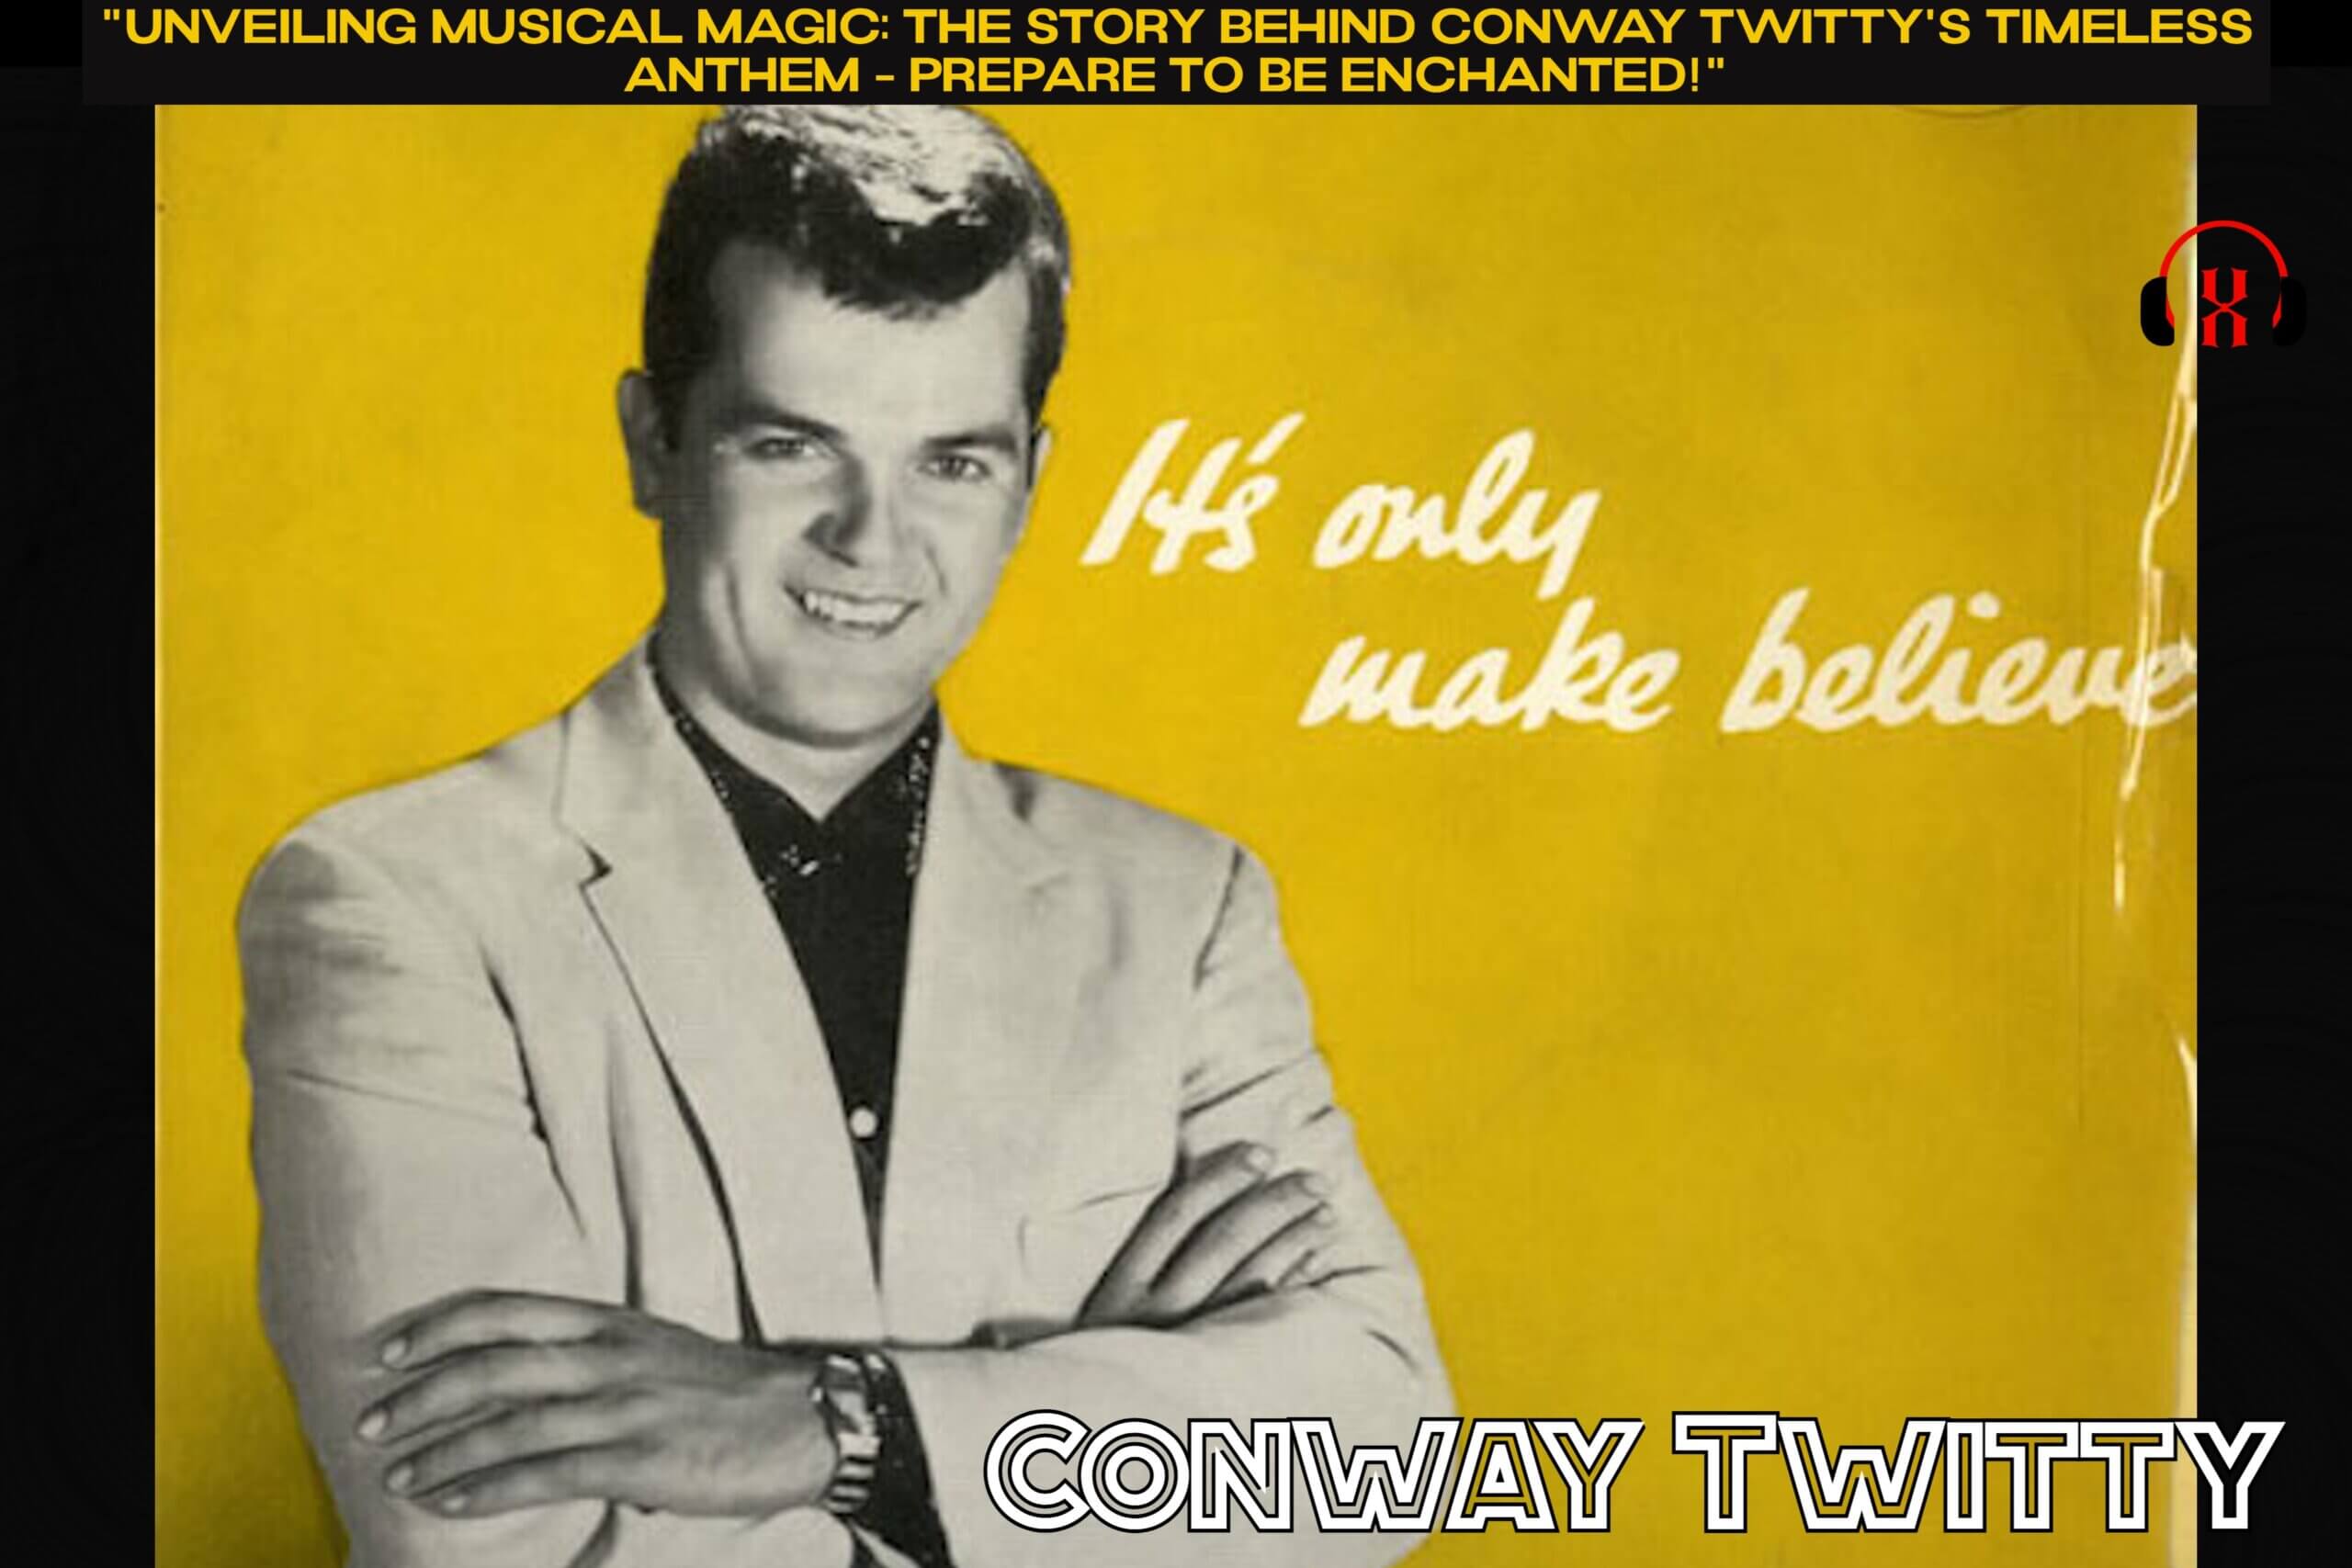 "Unveiling Musical Magic: The Story Behind Conway Twitty's Timeless Anthem - Prepare to Be Enchanted!"